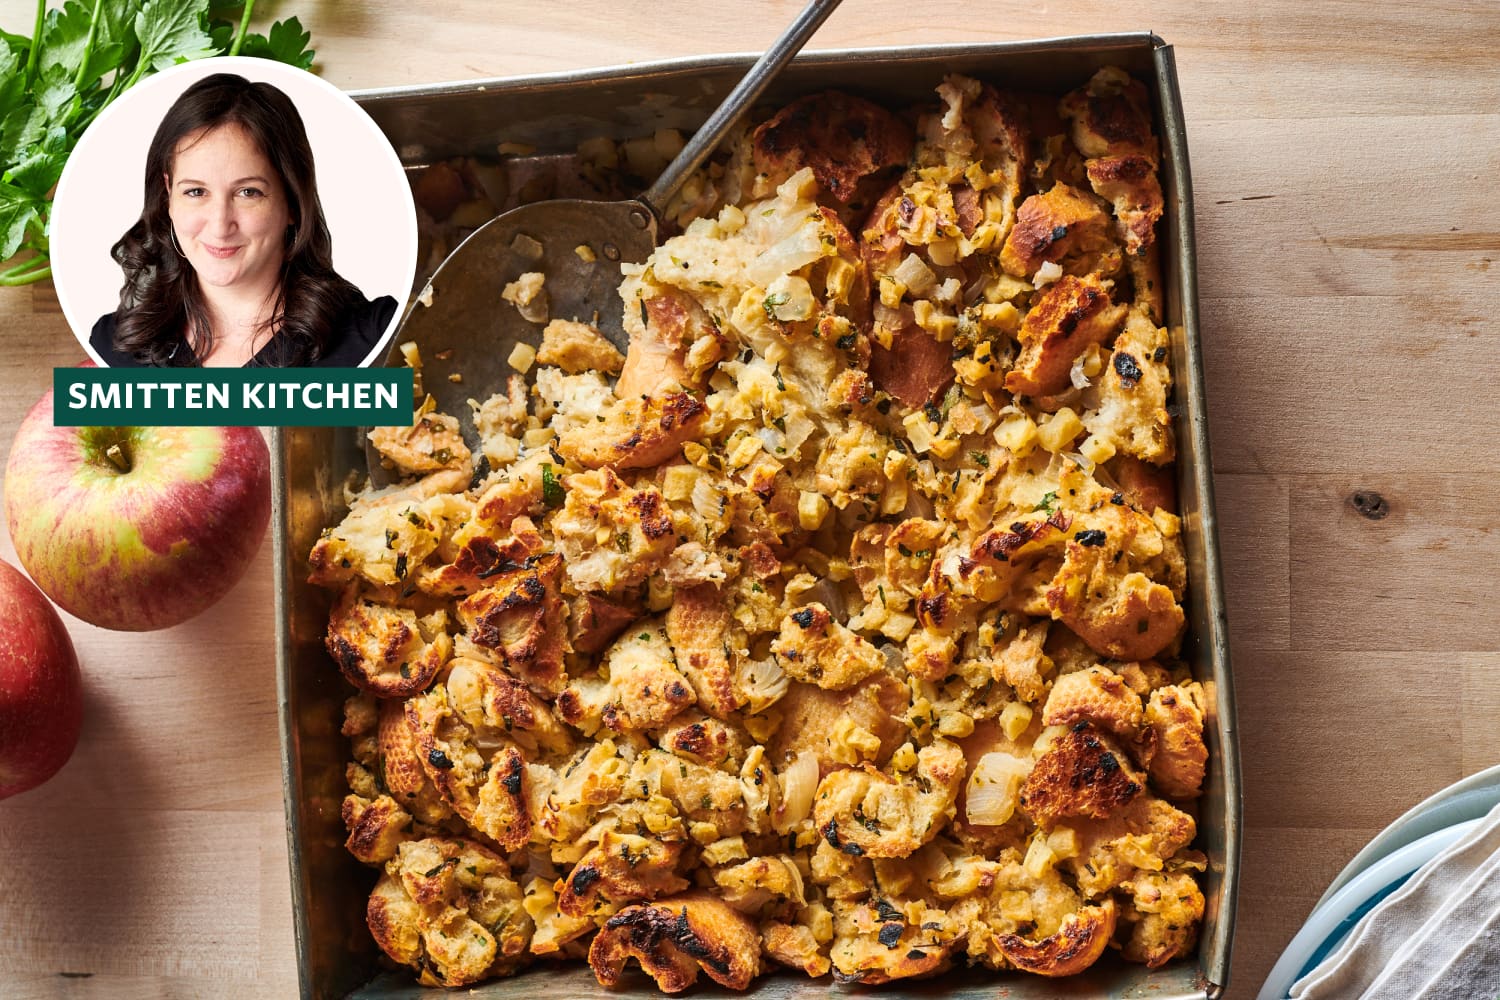 Is Smitten Kitchen’s Stuffing Recipe the Best One to Make? I Tried It to Find Out.